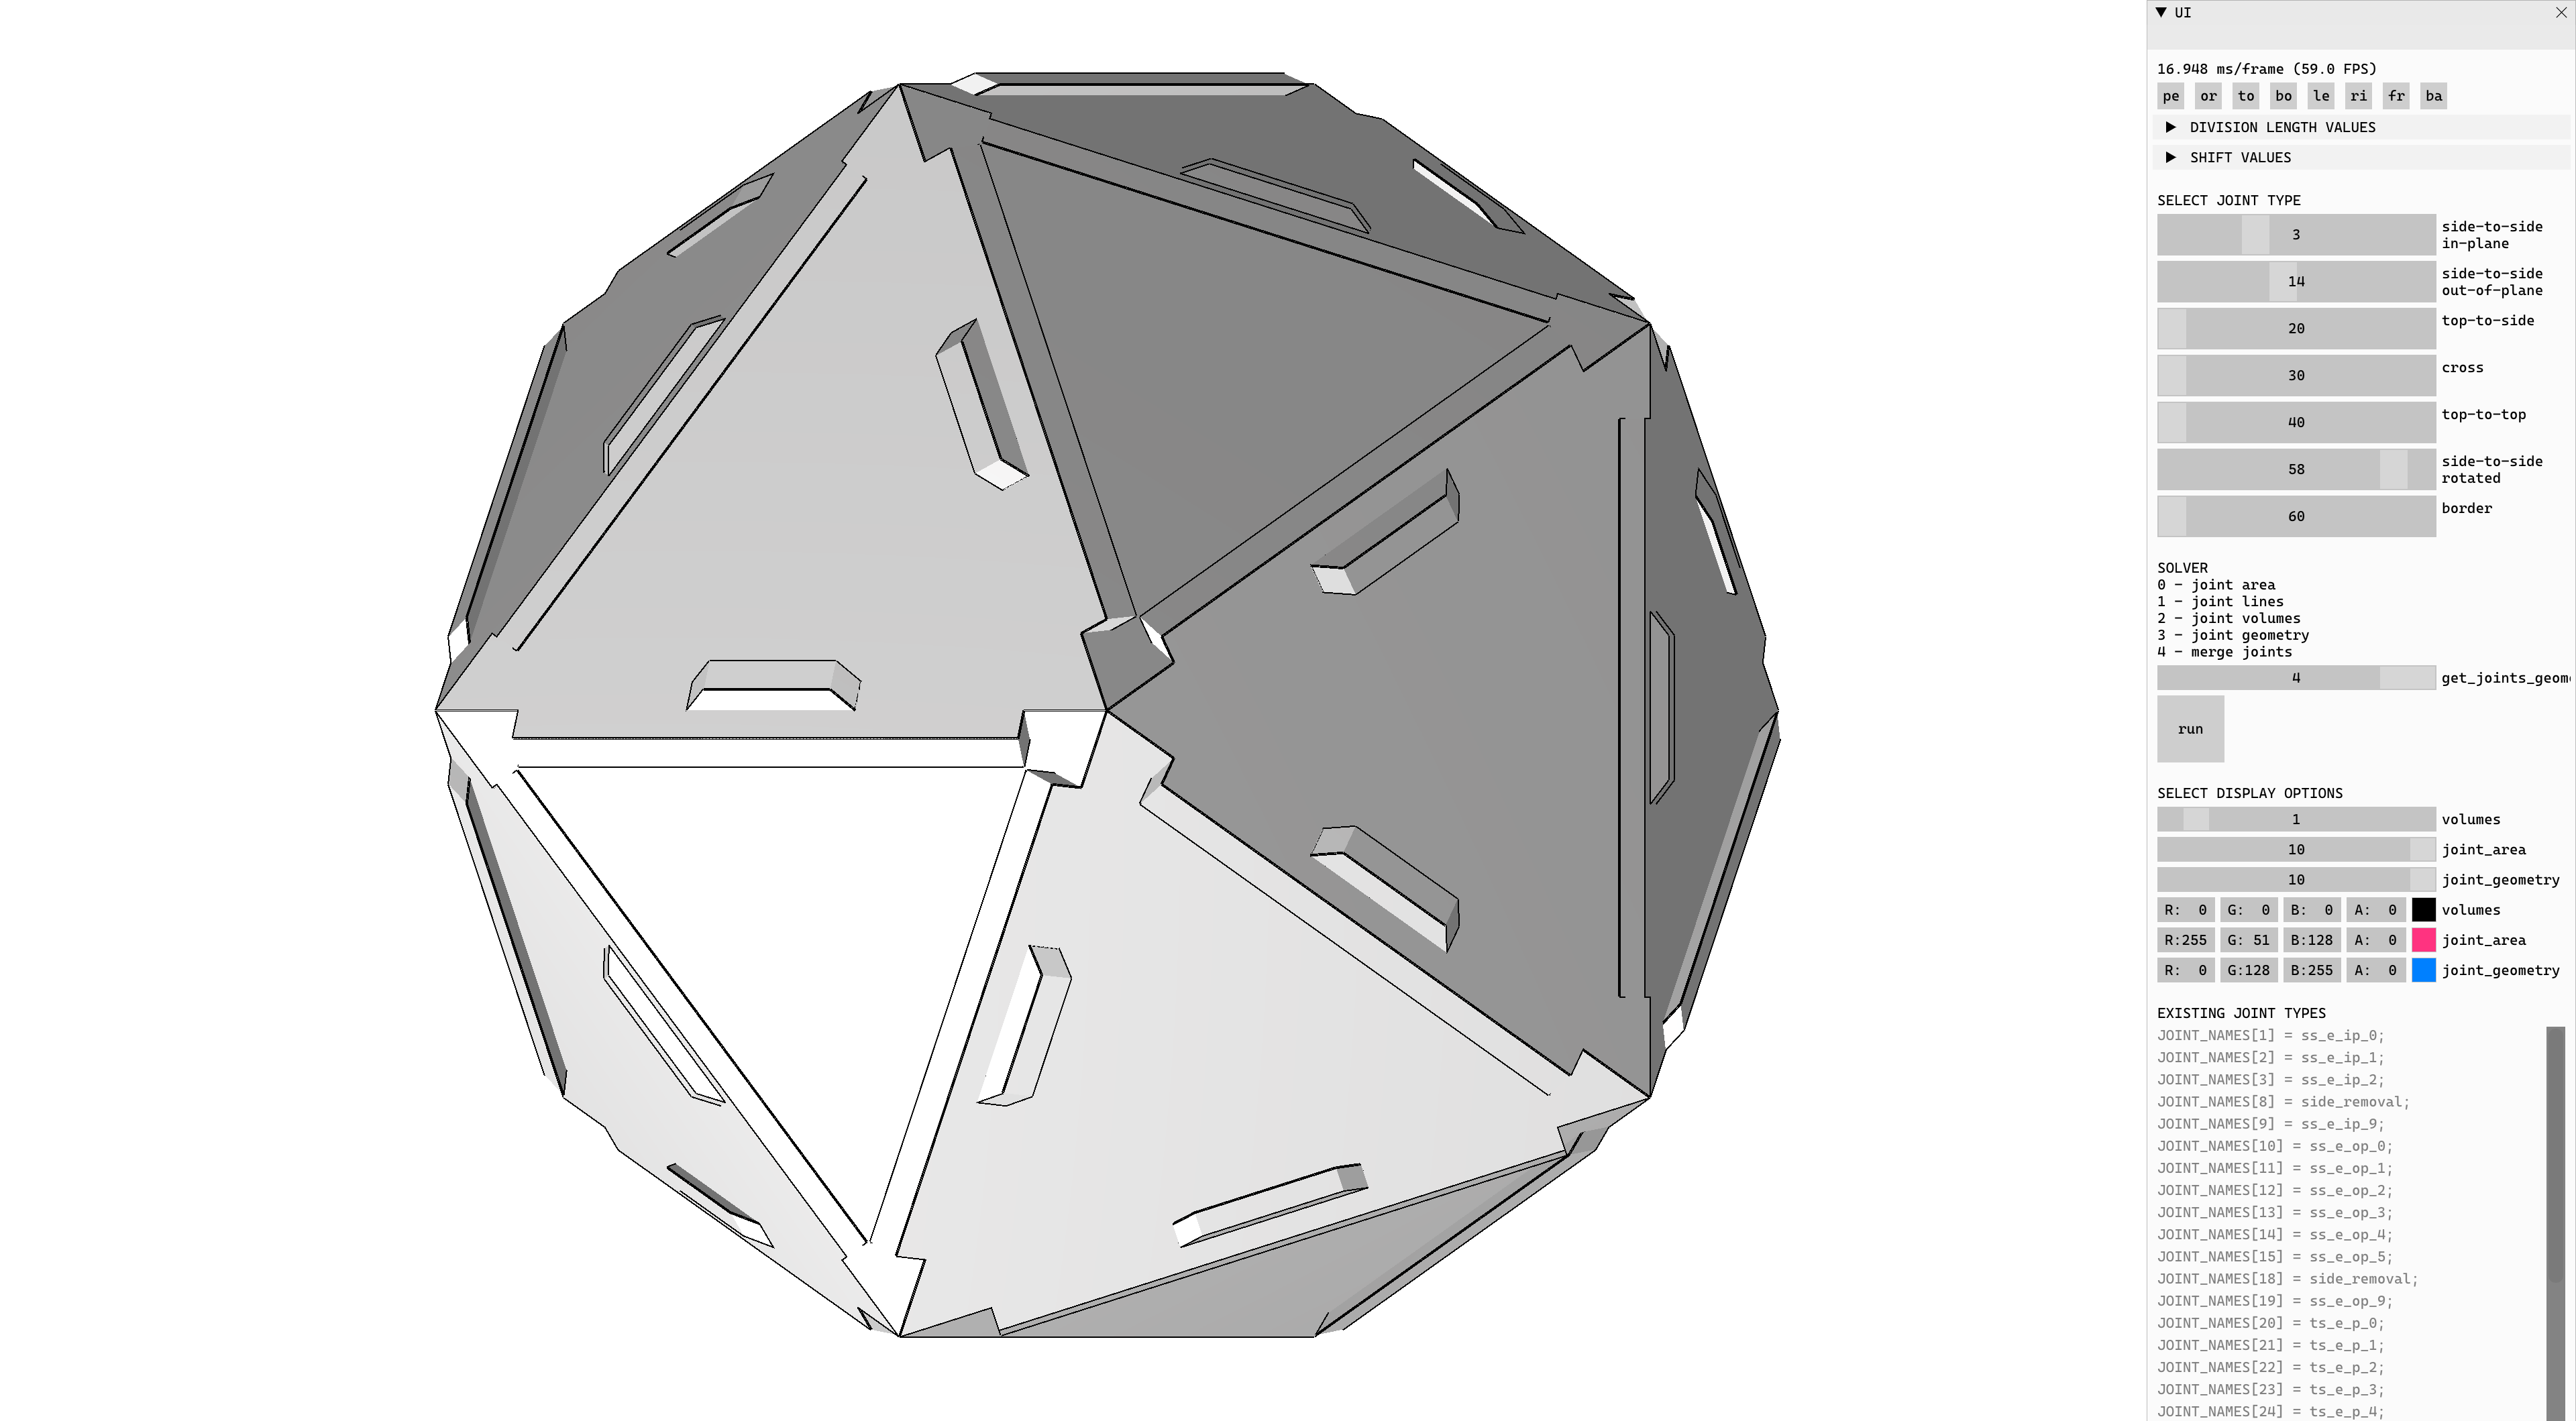 _images/type_plates_name_side_to_side_edge_outofplane_icosahedron.png